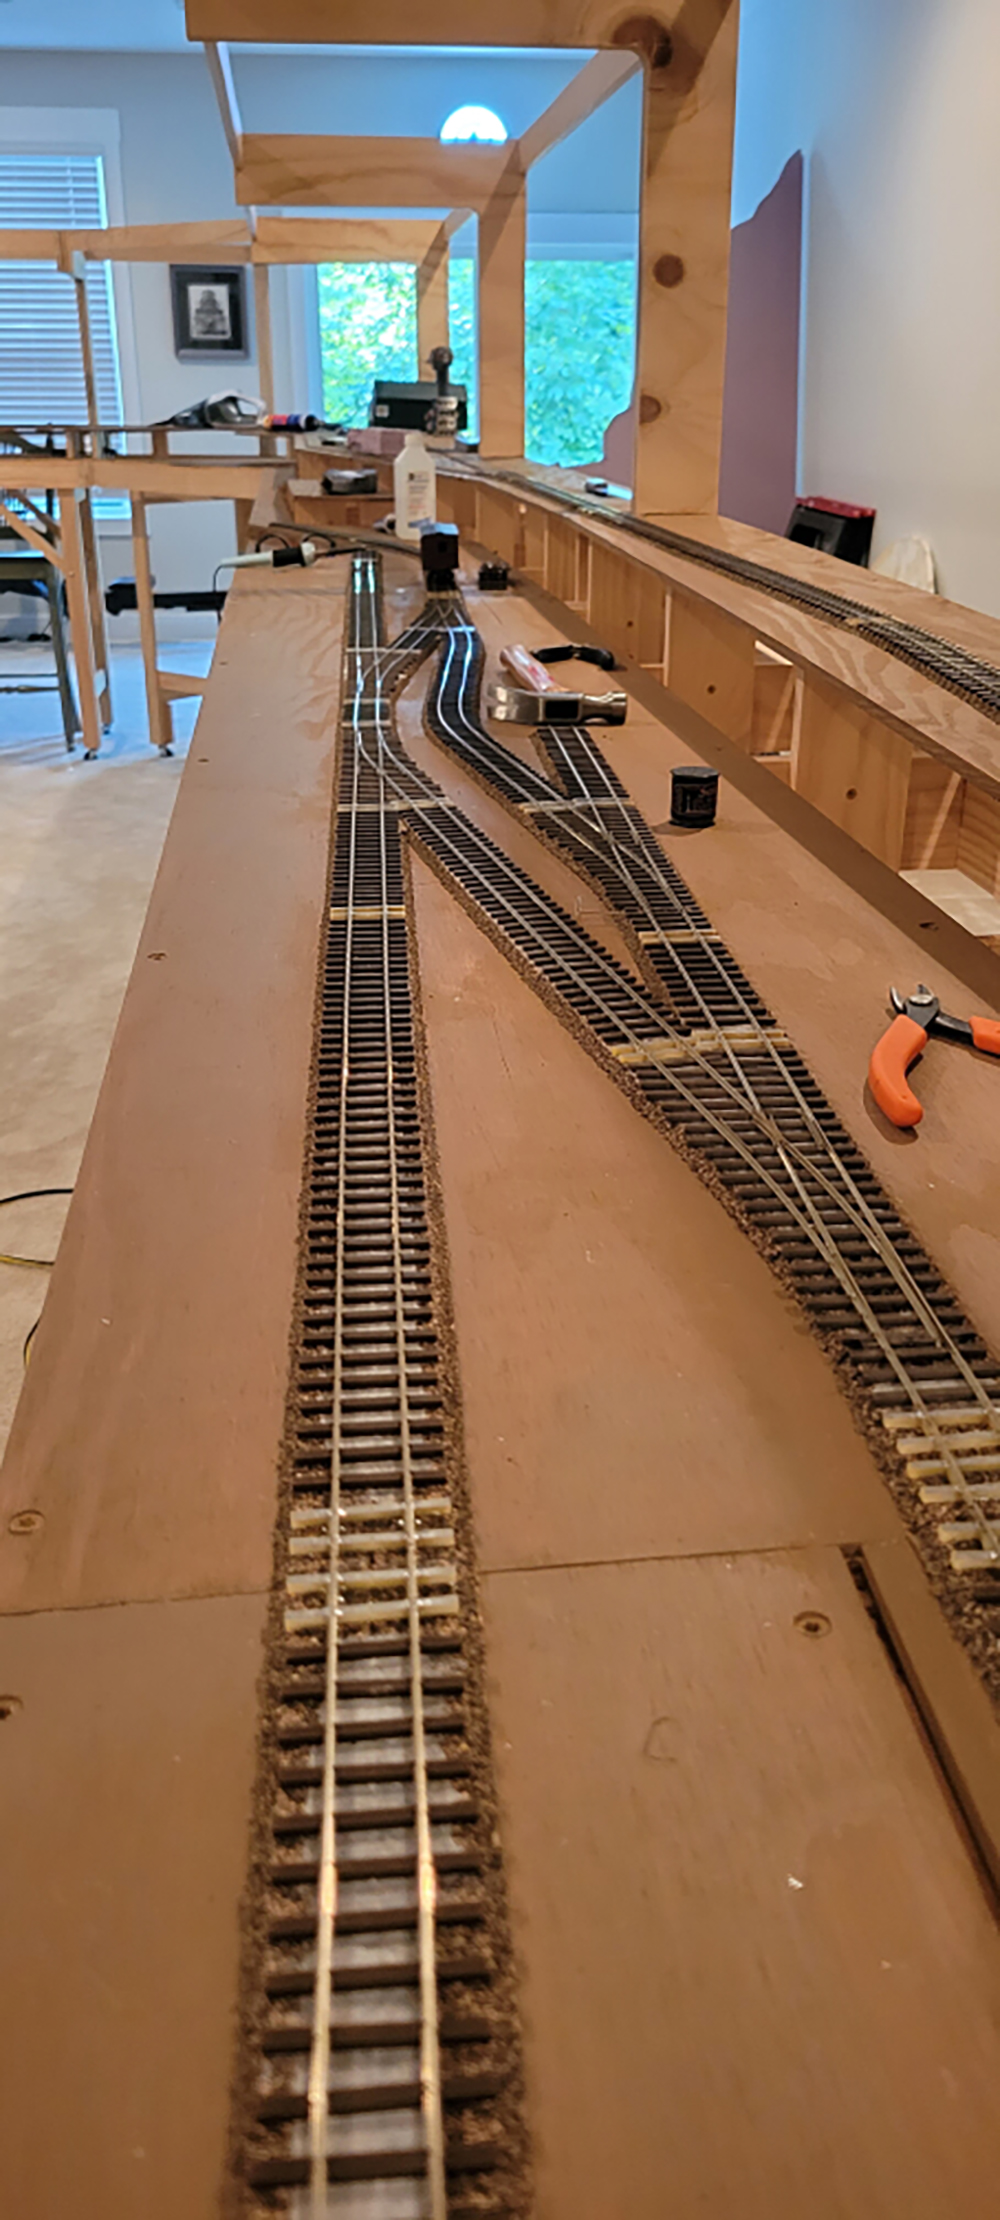 brown and sliver toy train track in straight and curved lines on a tan wood surface